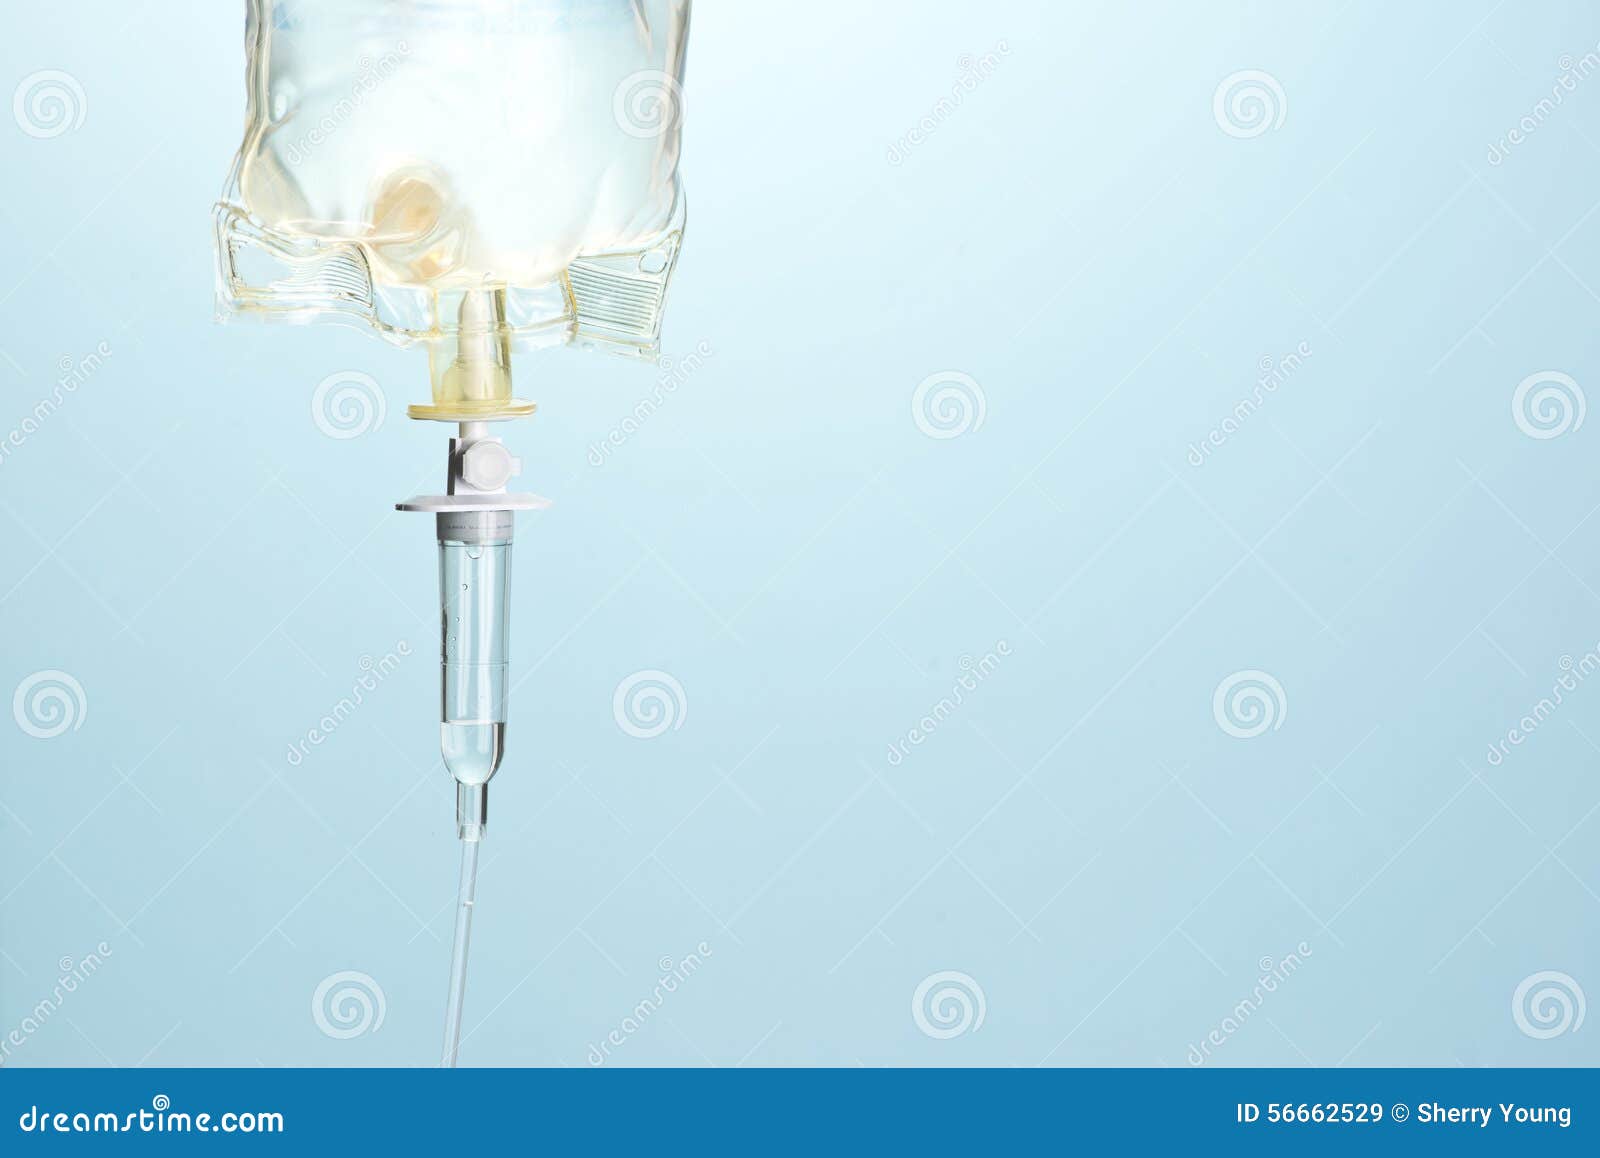 Intravenous (IV) Drip Bag - Stock Image - C022/1509 - Science Photo Library